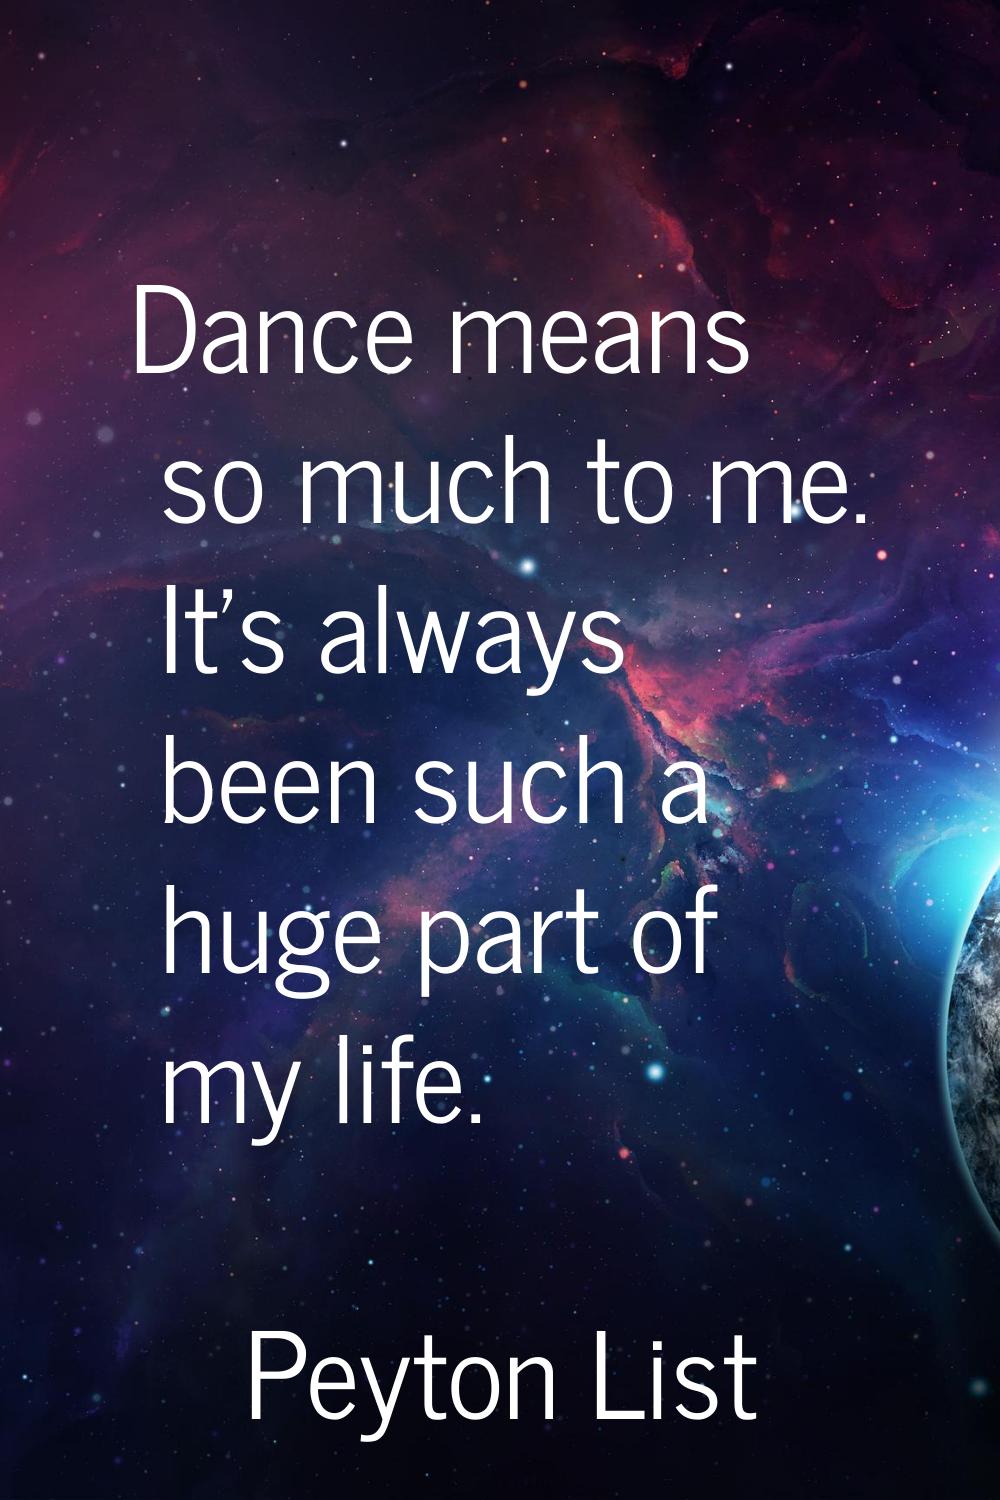 Dance means so much to me. It's always been such a huge part of my life.